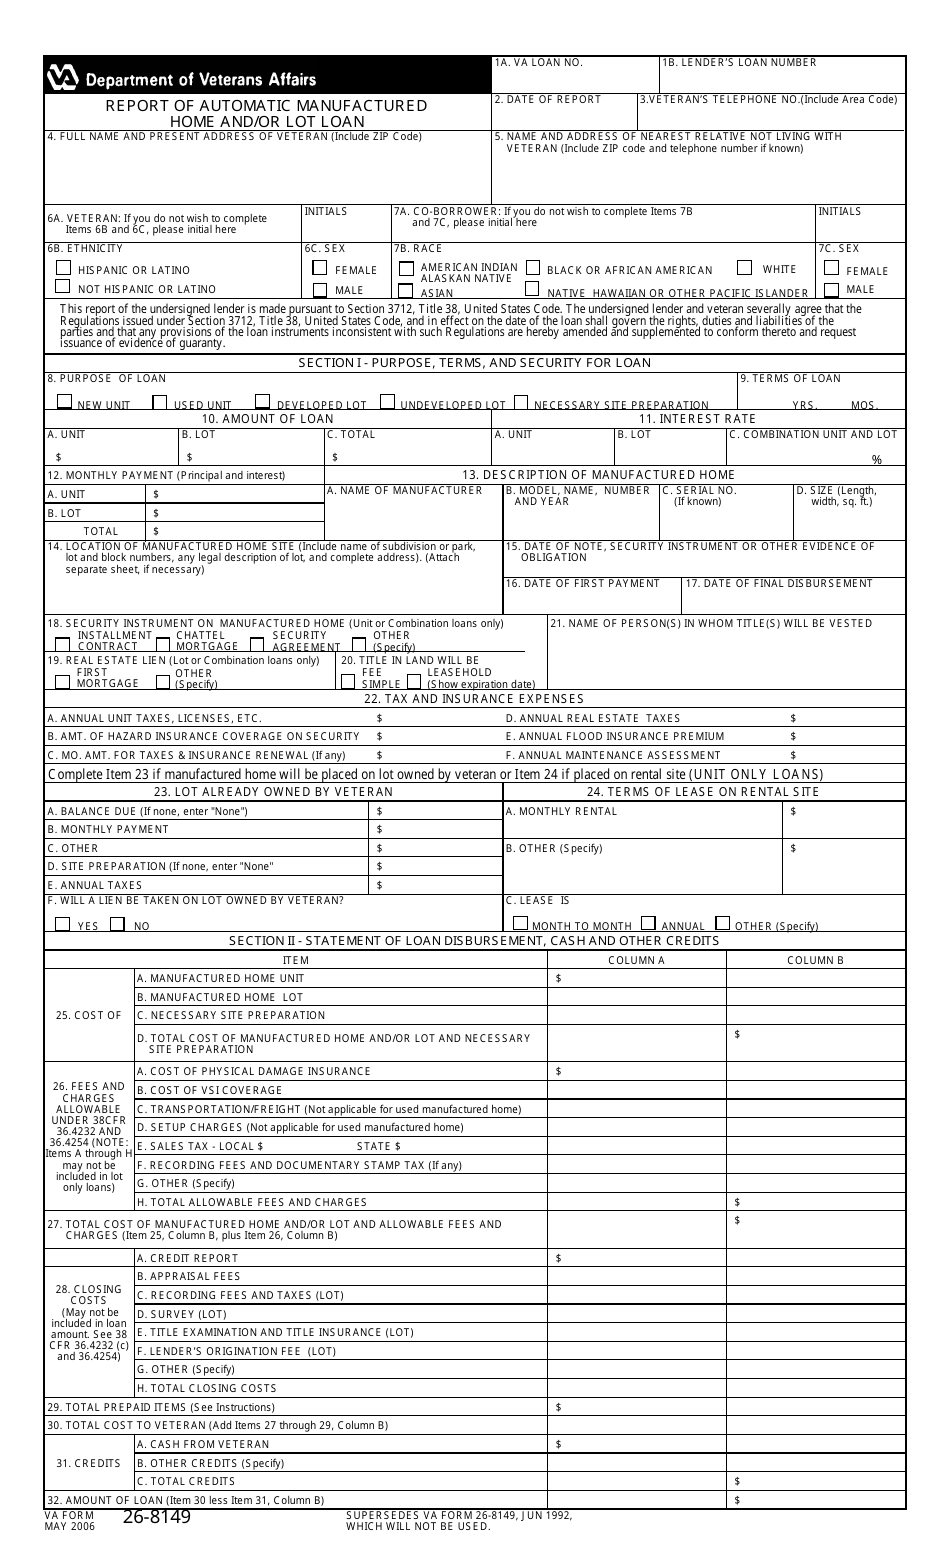 VA Form 26-8149 Report of Automatic Manufactured Home and / or Lot Loan, Page 1